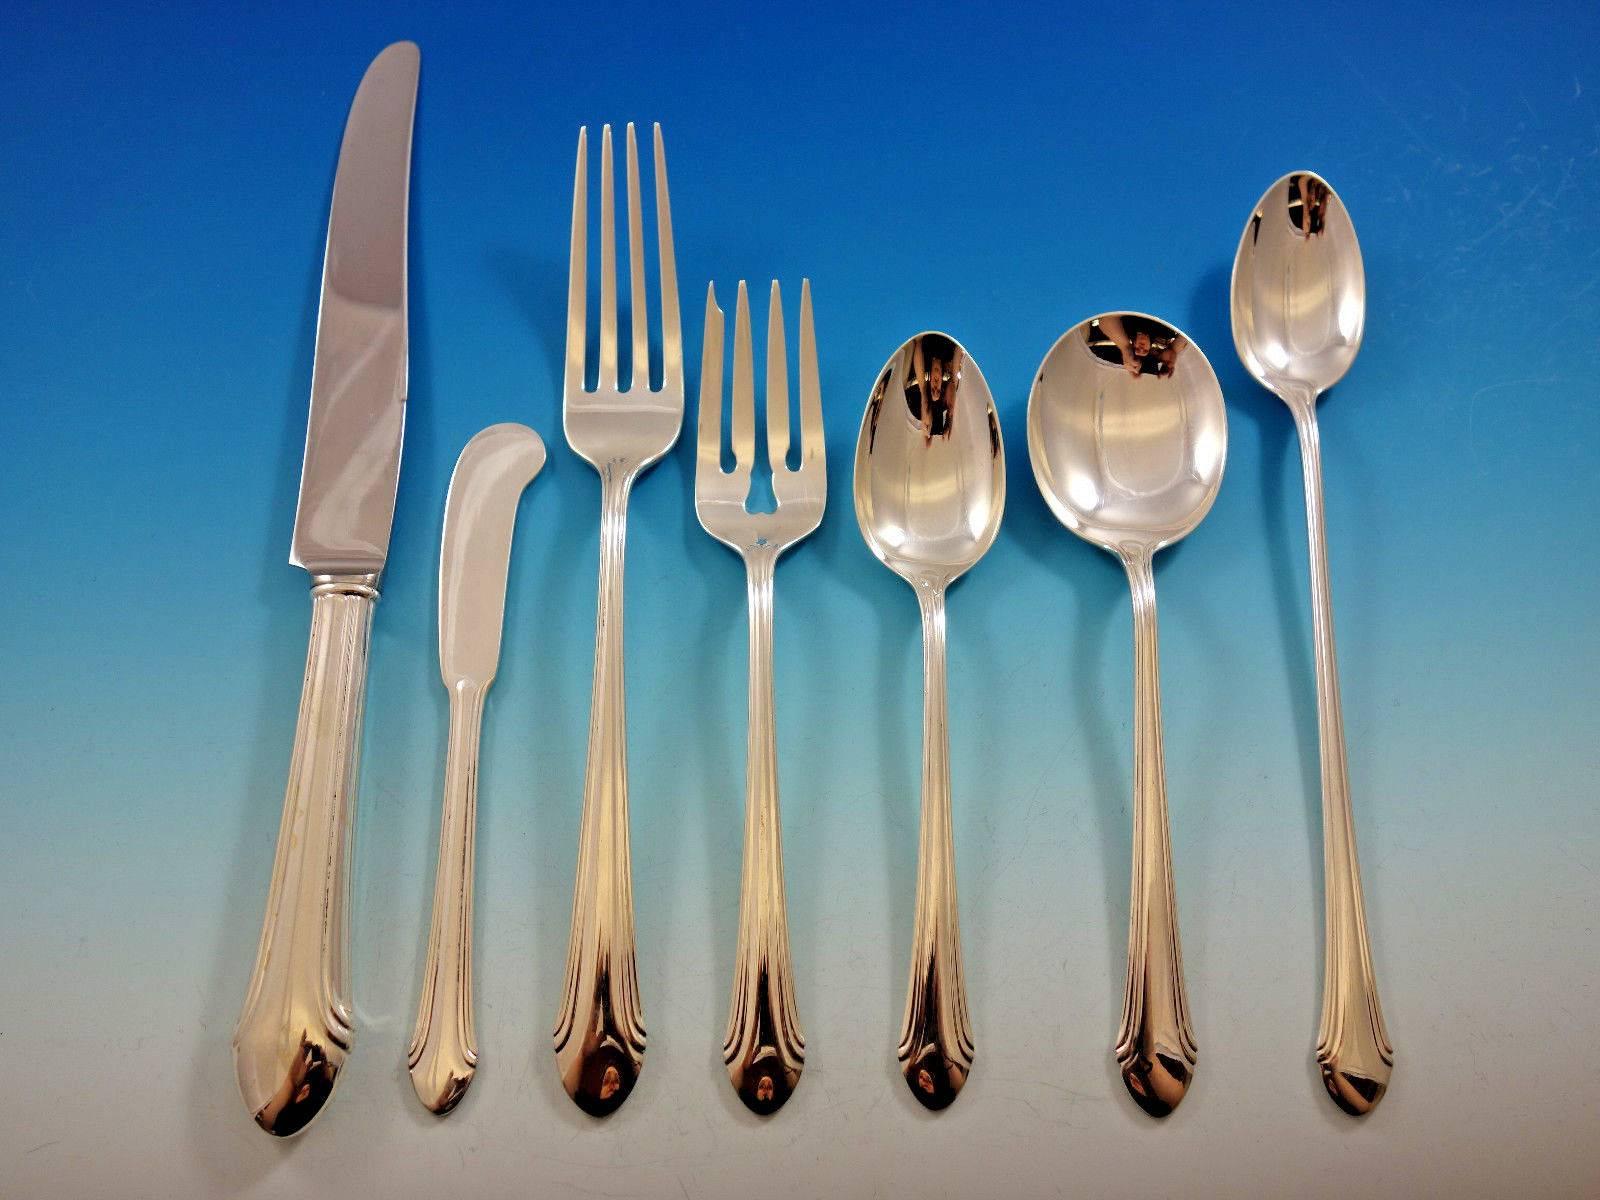 Dinner size Romantique by Alvin sterling silver flatware set - 90 pieces. This set includes: 

12 dinner size knives, 9 5/8